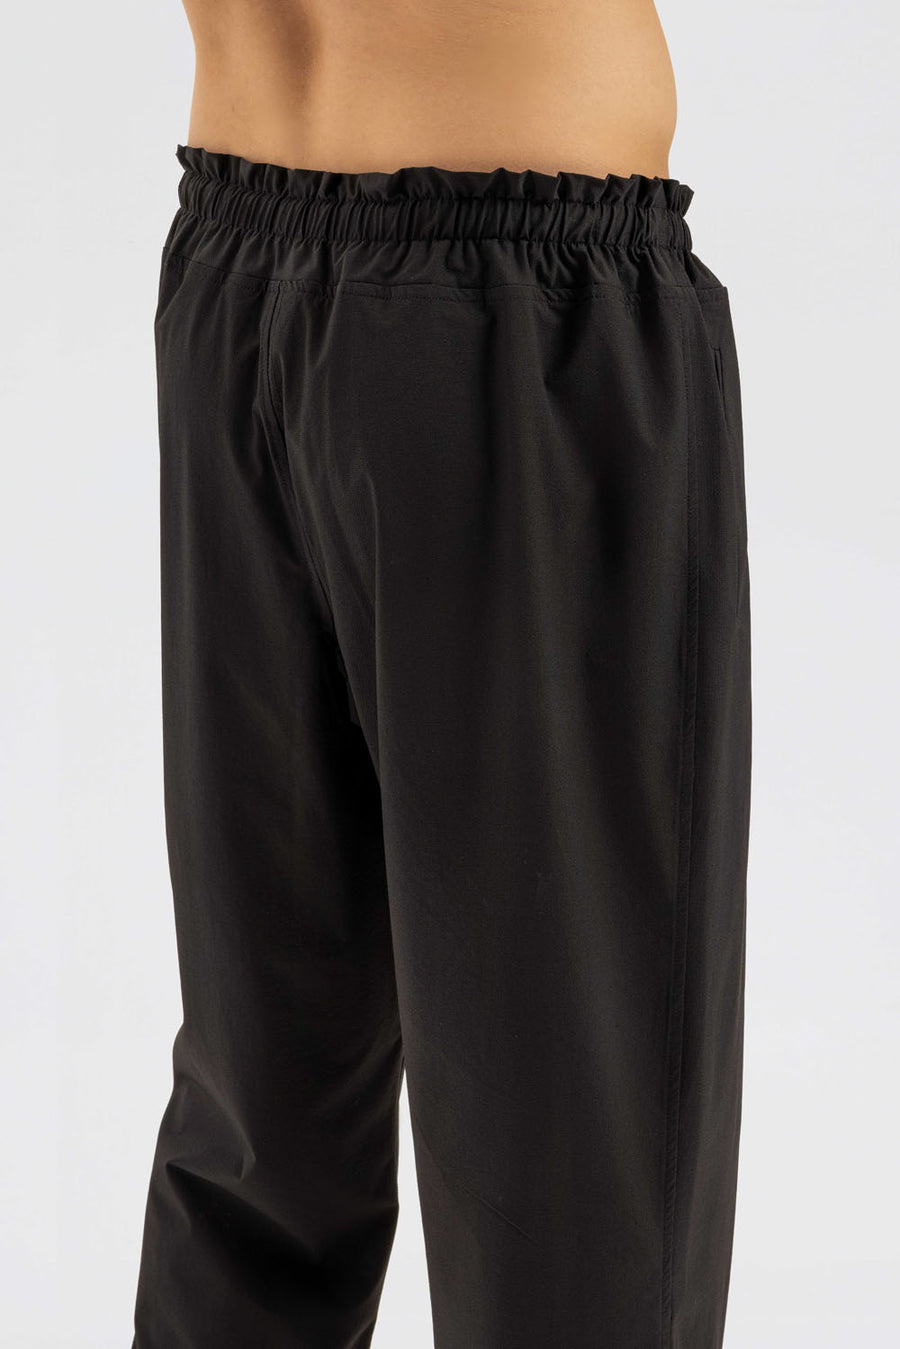 Simple Warrior Trousers